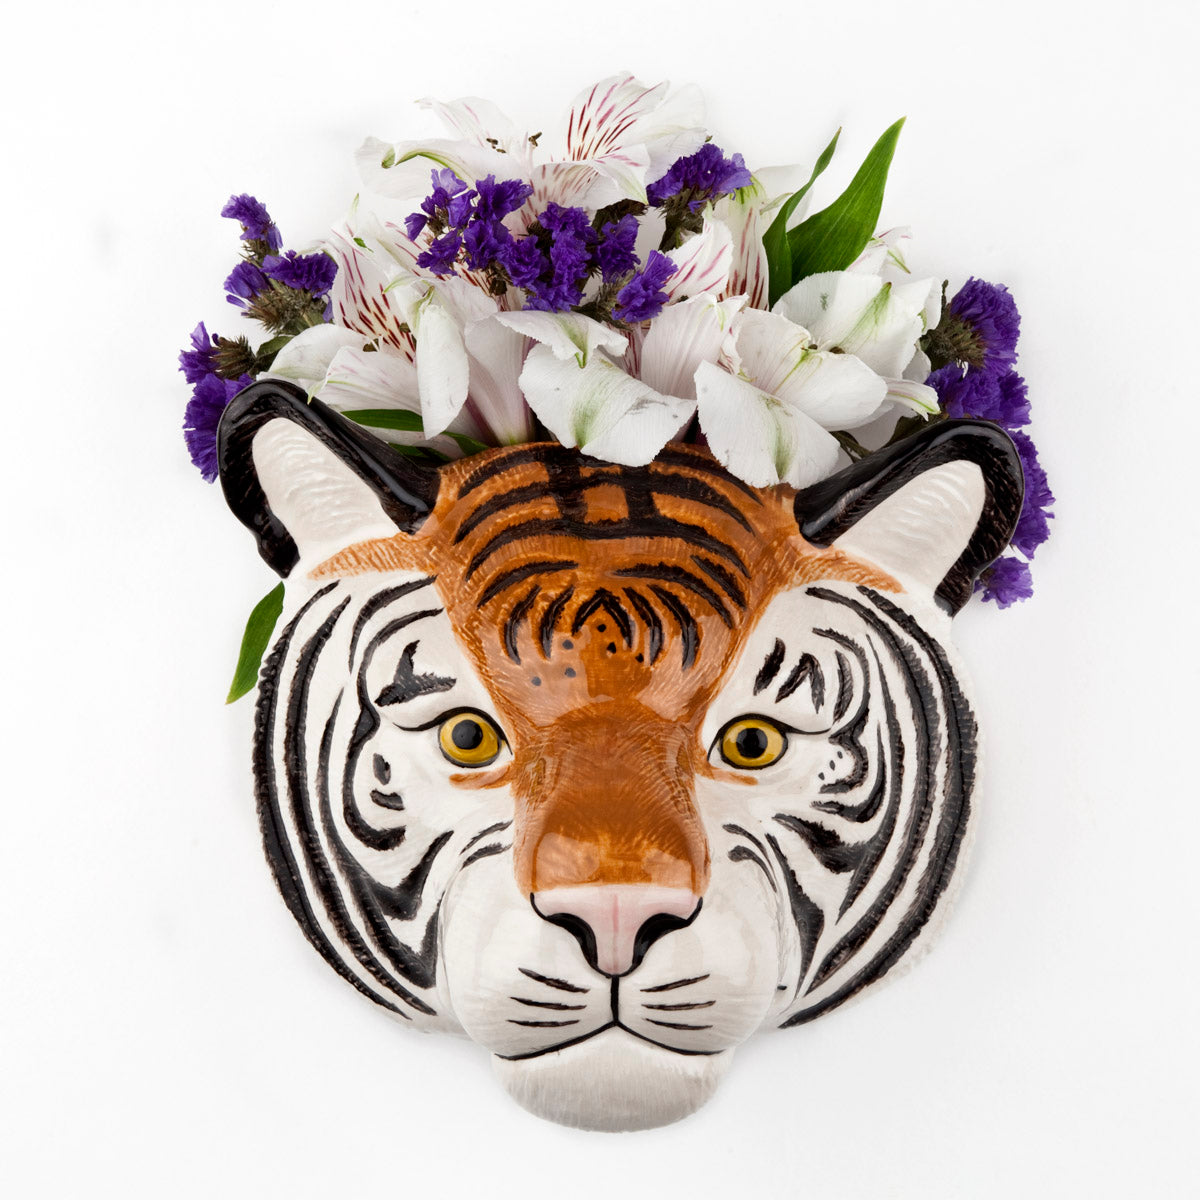 A quirky Tiger Ceramic with flowers in it, crafted by Quail, a British brand known for their unique and eccentric pieces.